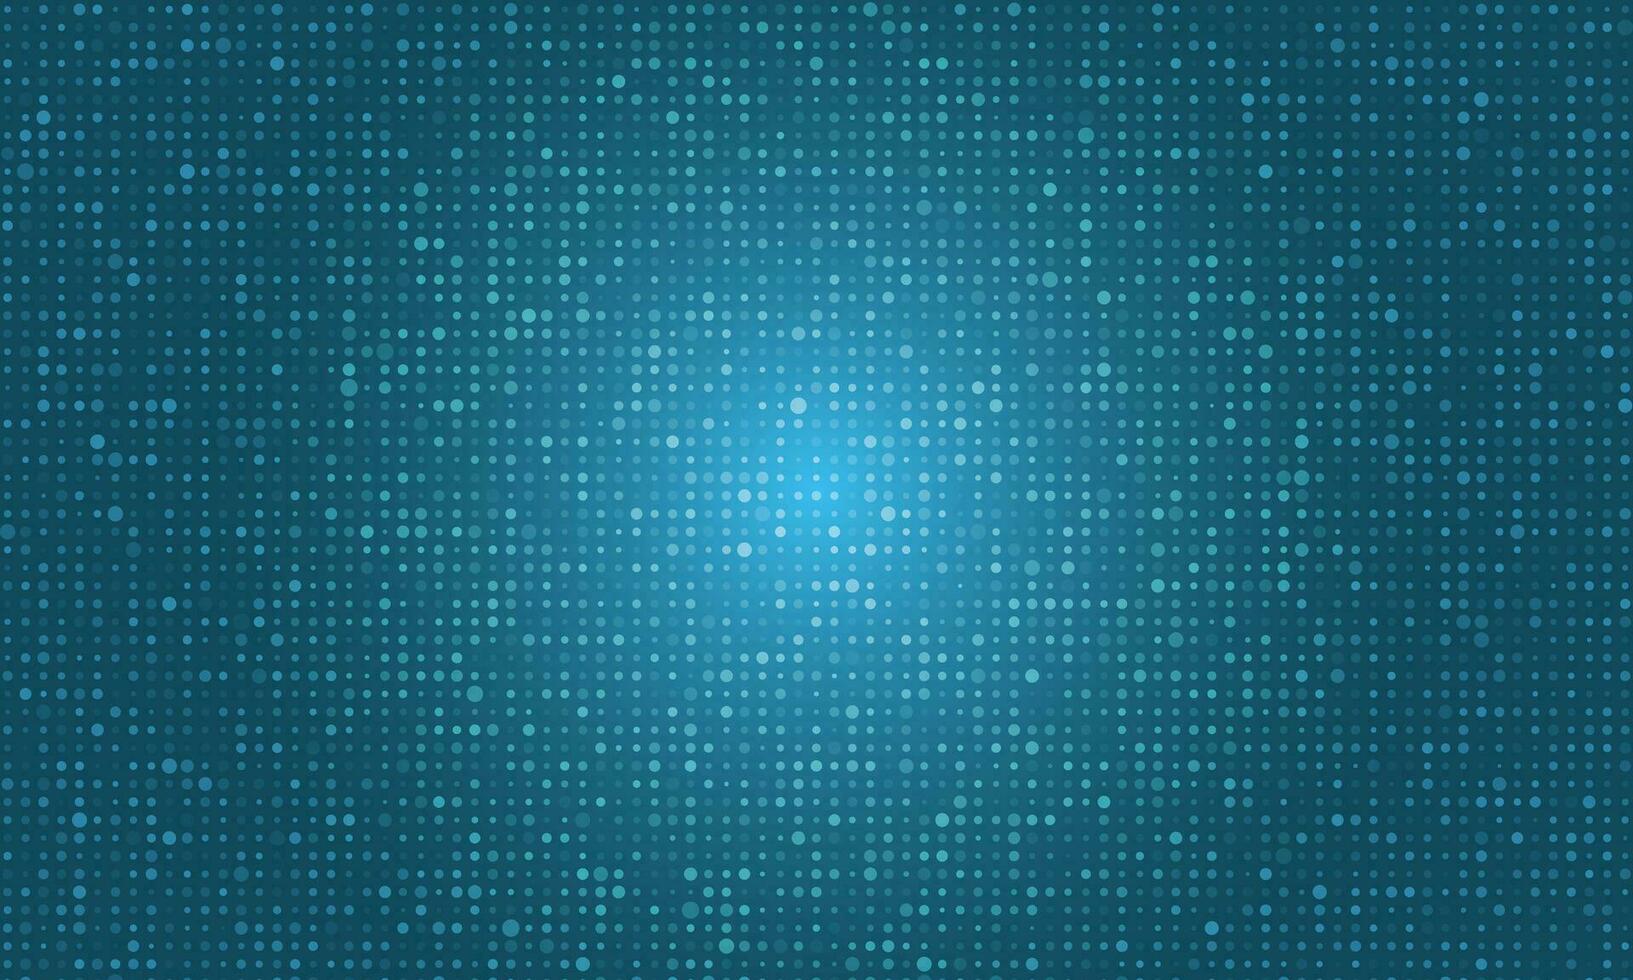 Halftone dots on blue background. vector